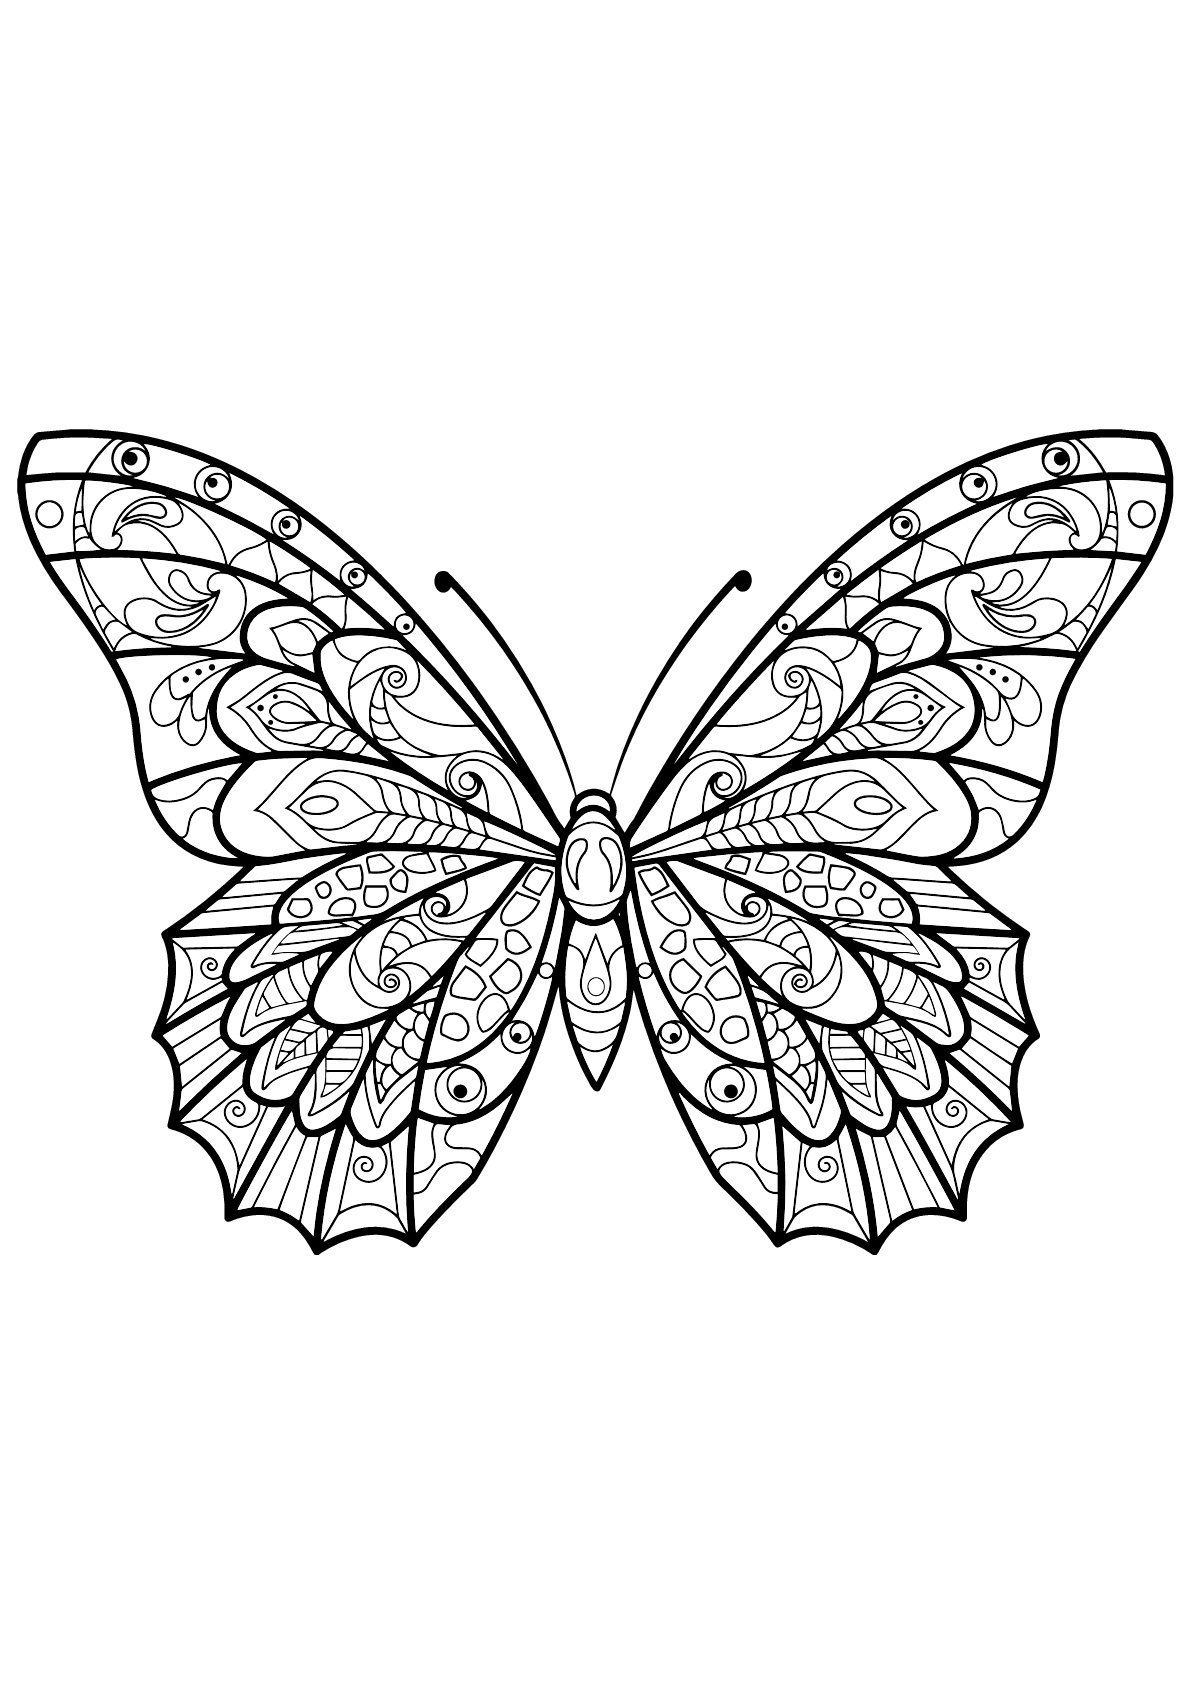 Butterfly beautiful patterns 3 - Butterflies & insects Adult Coloring Pages